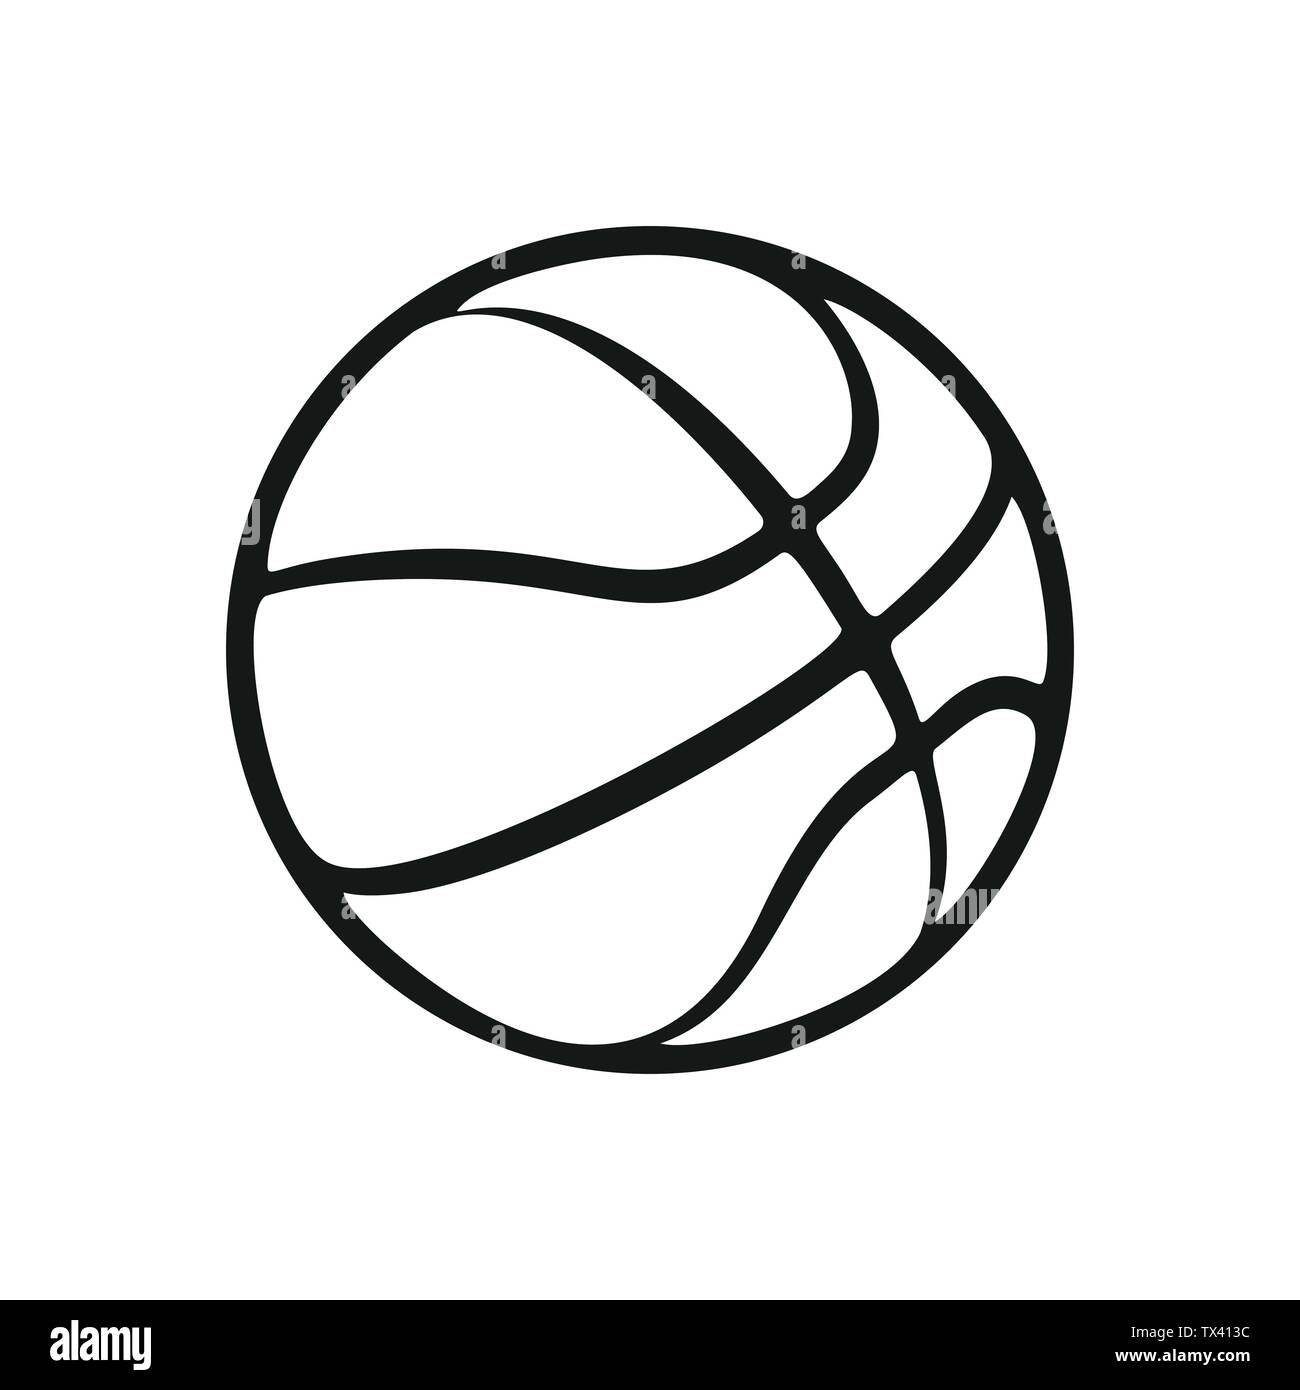 Nba logo Cut Out Stock Images & Pictures - Alamy